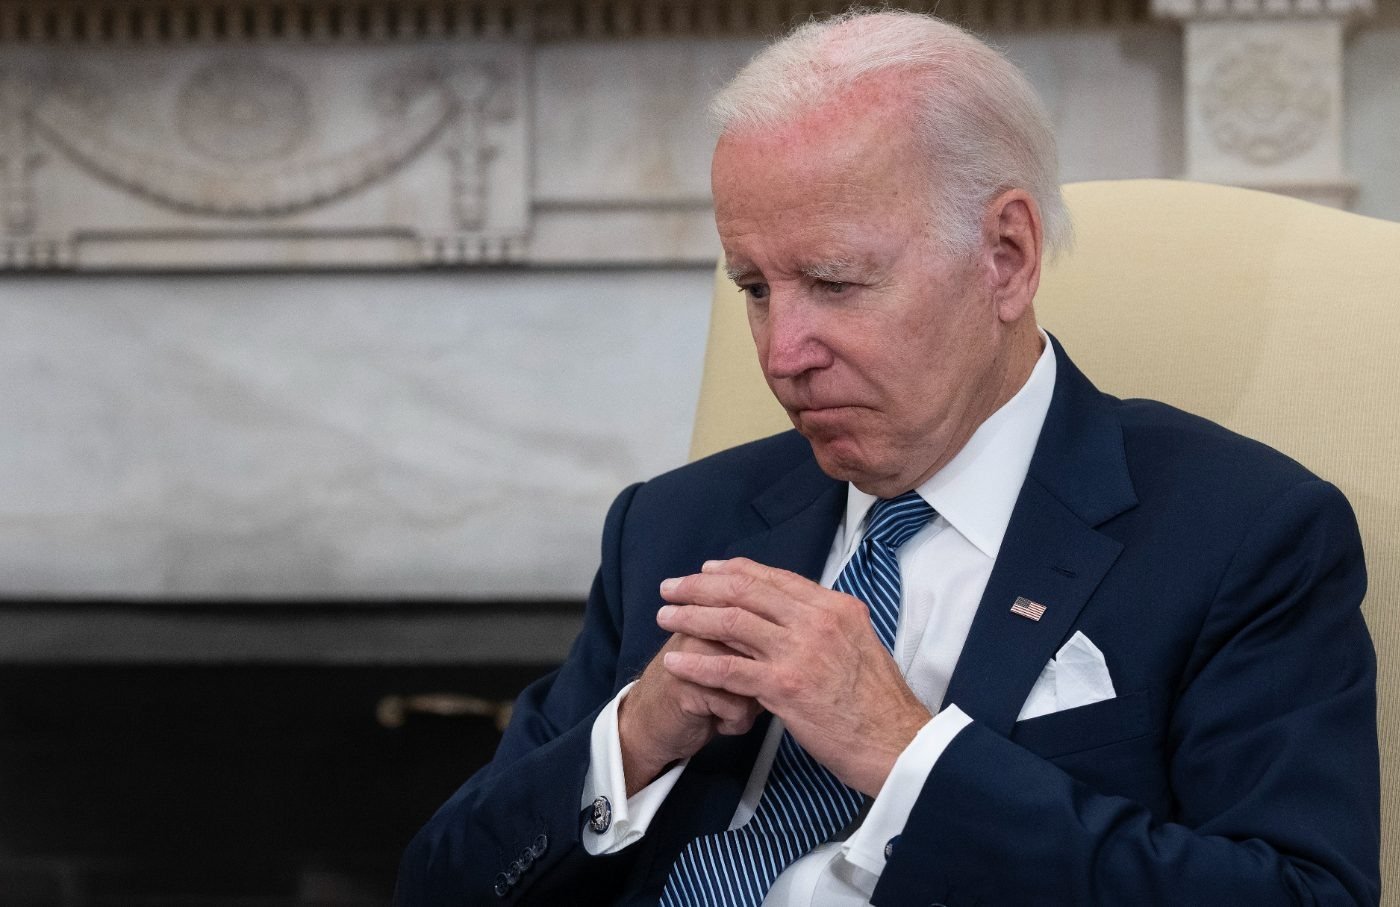 US President Biden admits that he is old